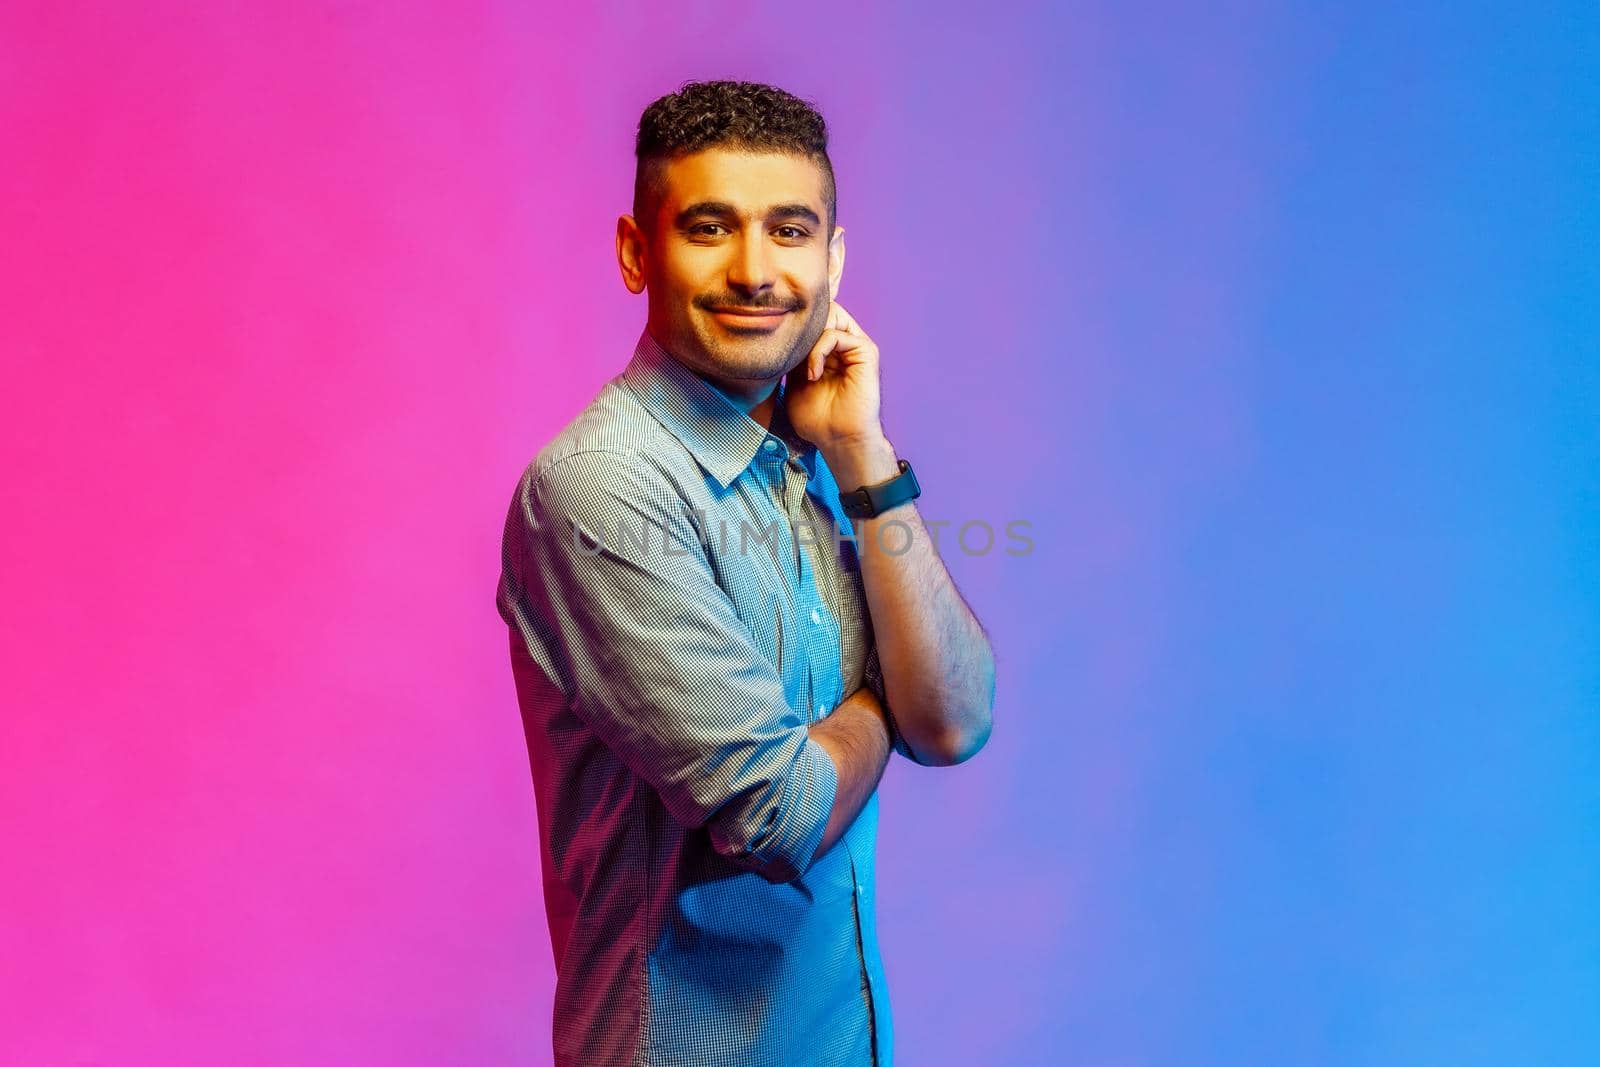 Portrait of young adult smiling handsome man in shirt standing looking at camera with happy positive facial expression. Indoor studio shot isolated on colorful neon light background.